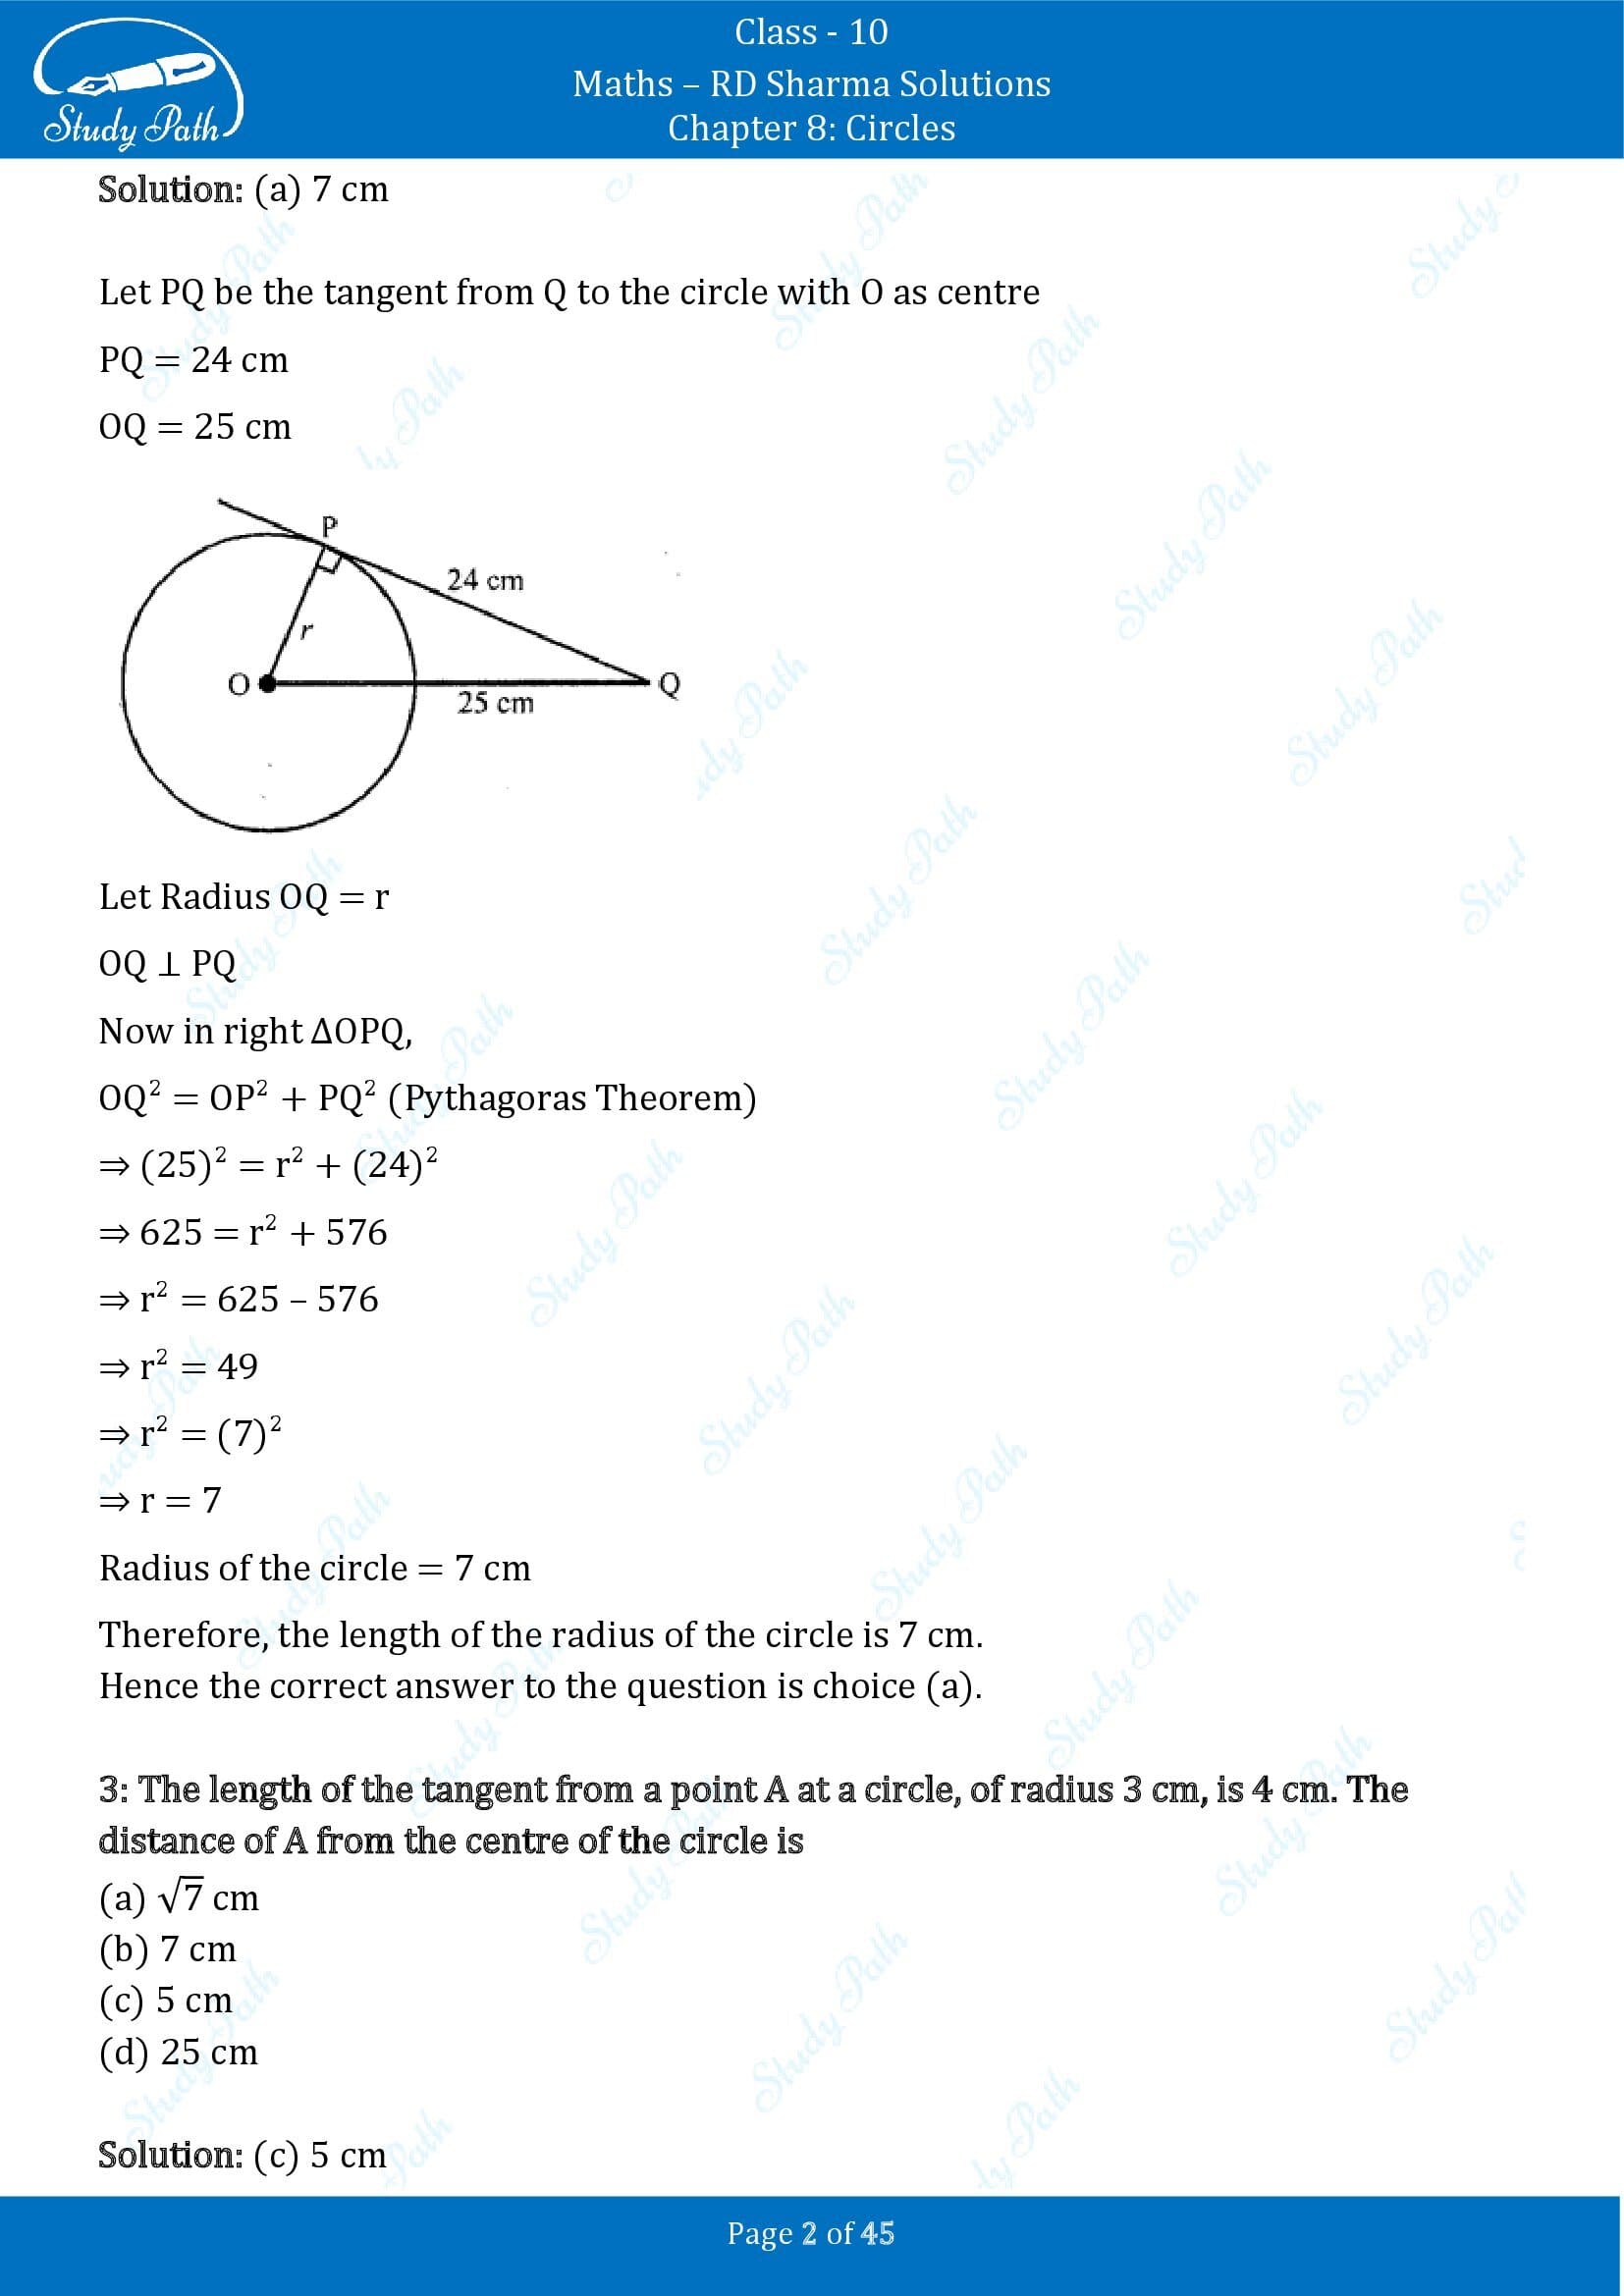 RD Sharma Solutions Class 10 Chapter 8 Circles Multiple Choice Questions MCQs 00002